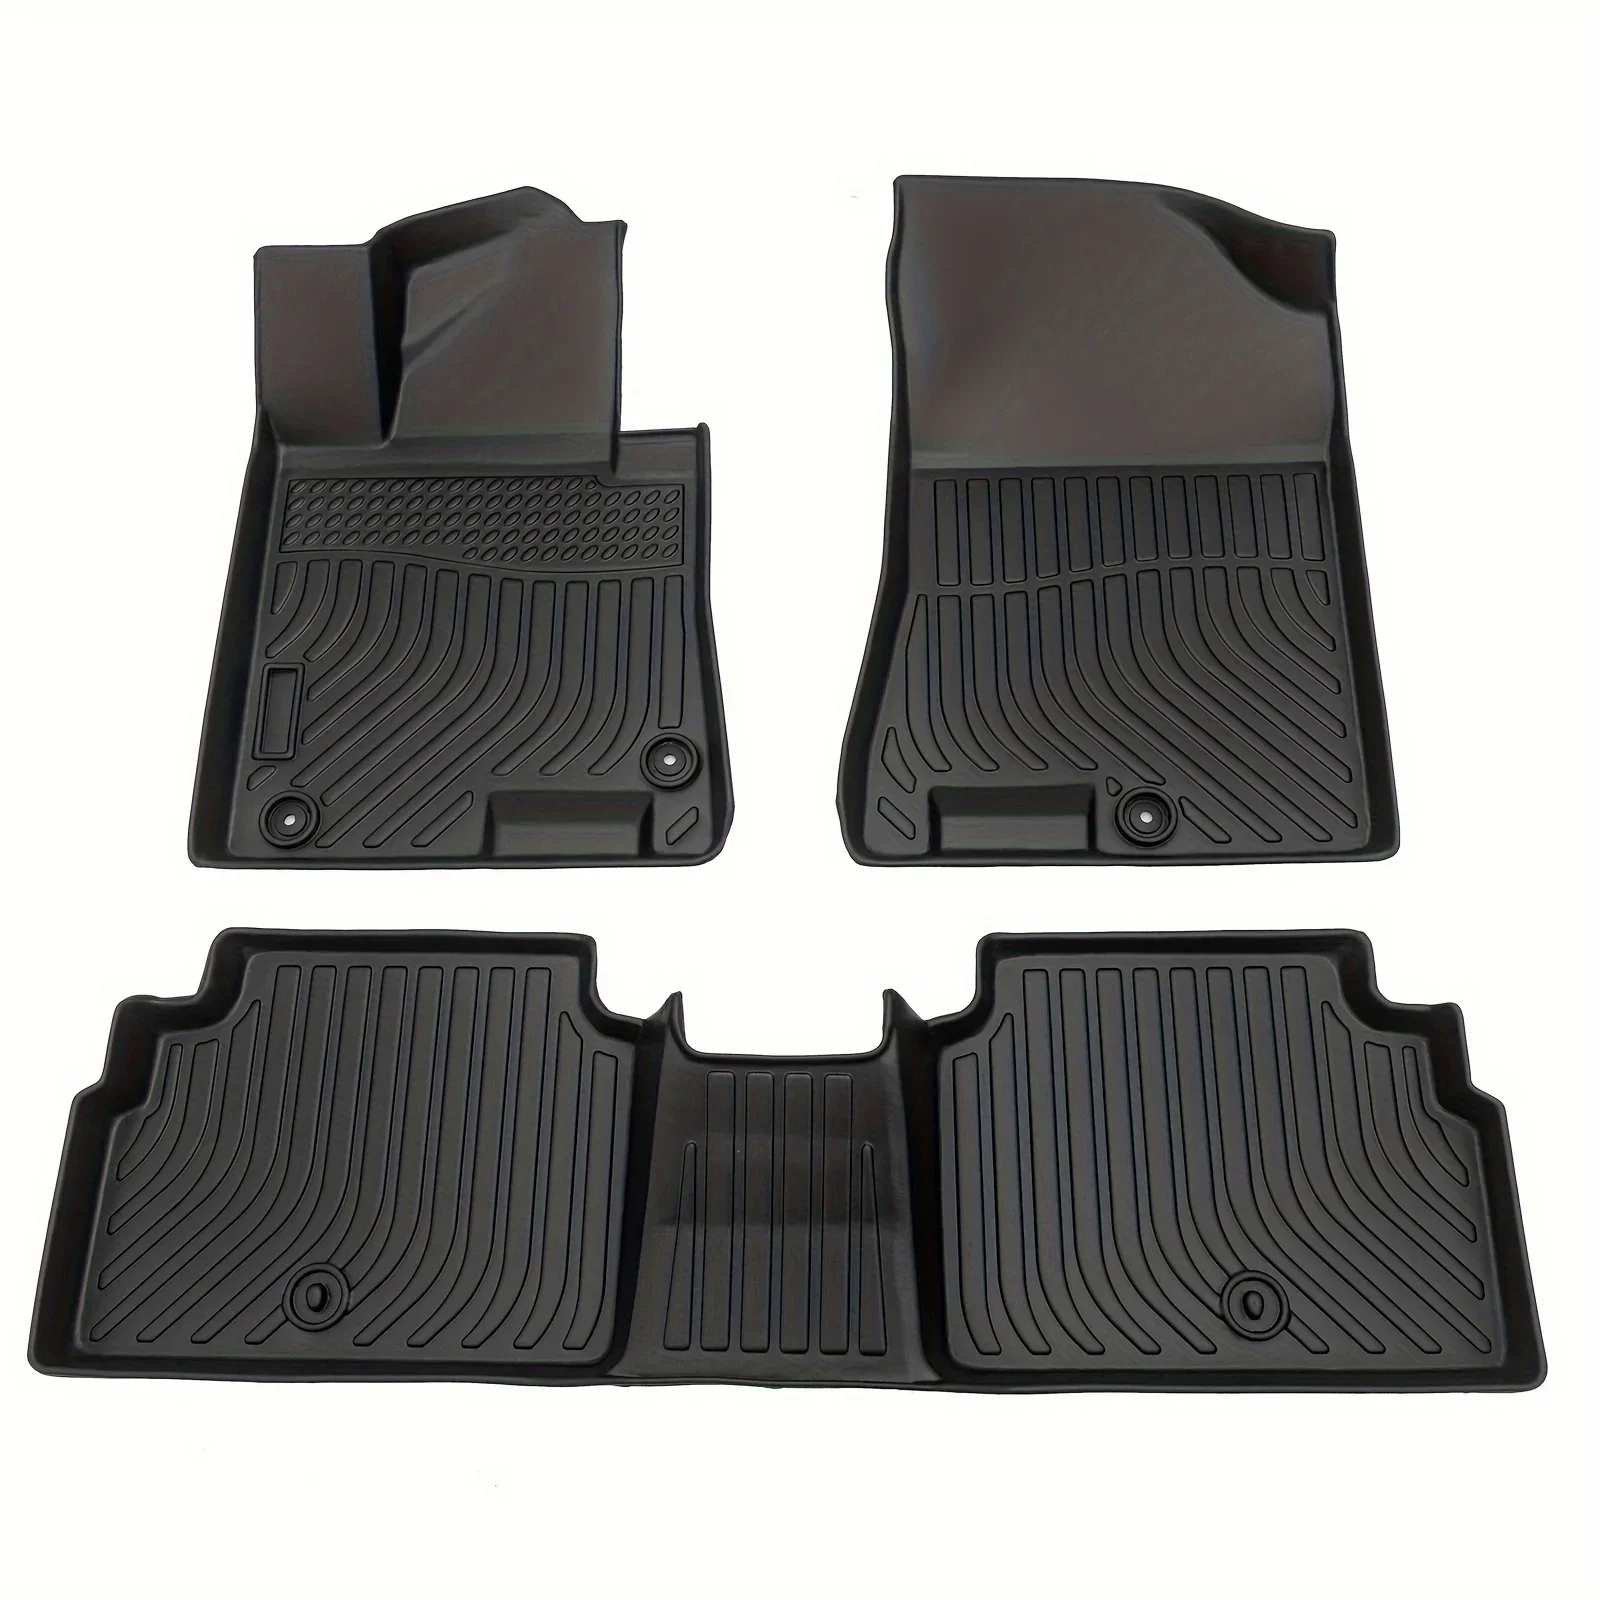 

High-Quality Black Car Floor Mats for 20-23 Hyundai Sonata and Kia K5, Suitable for FWD Models Only, Not Compatible with AWD Ver